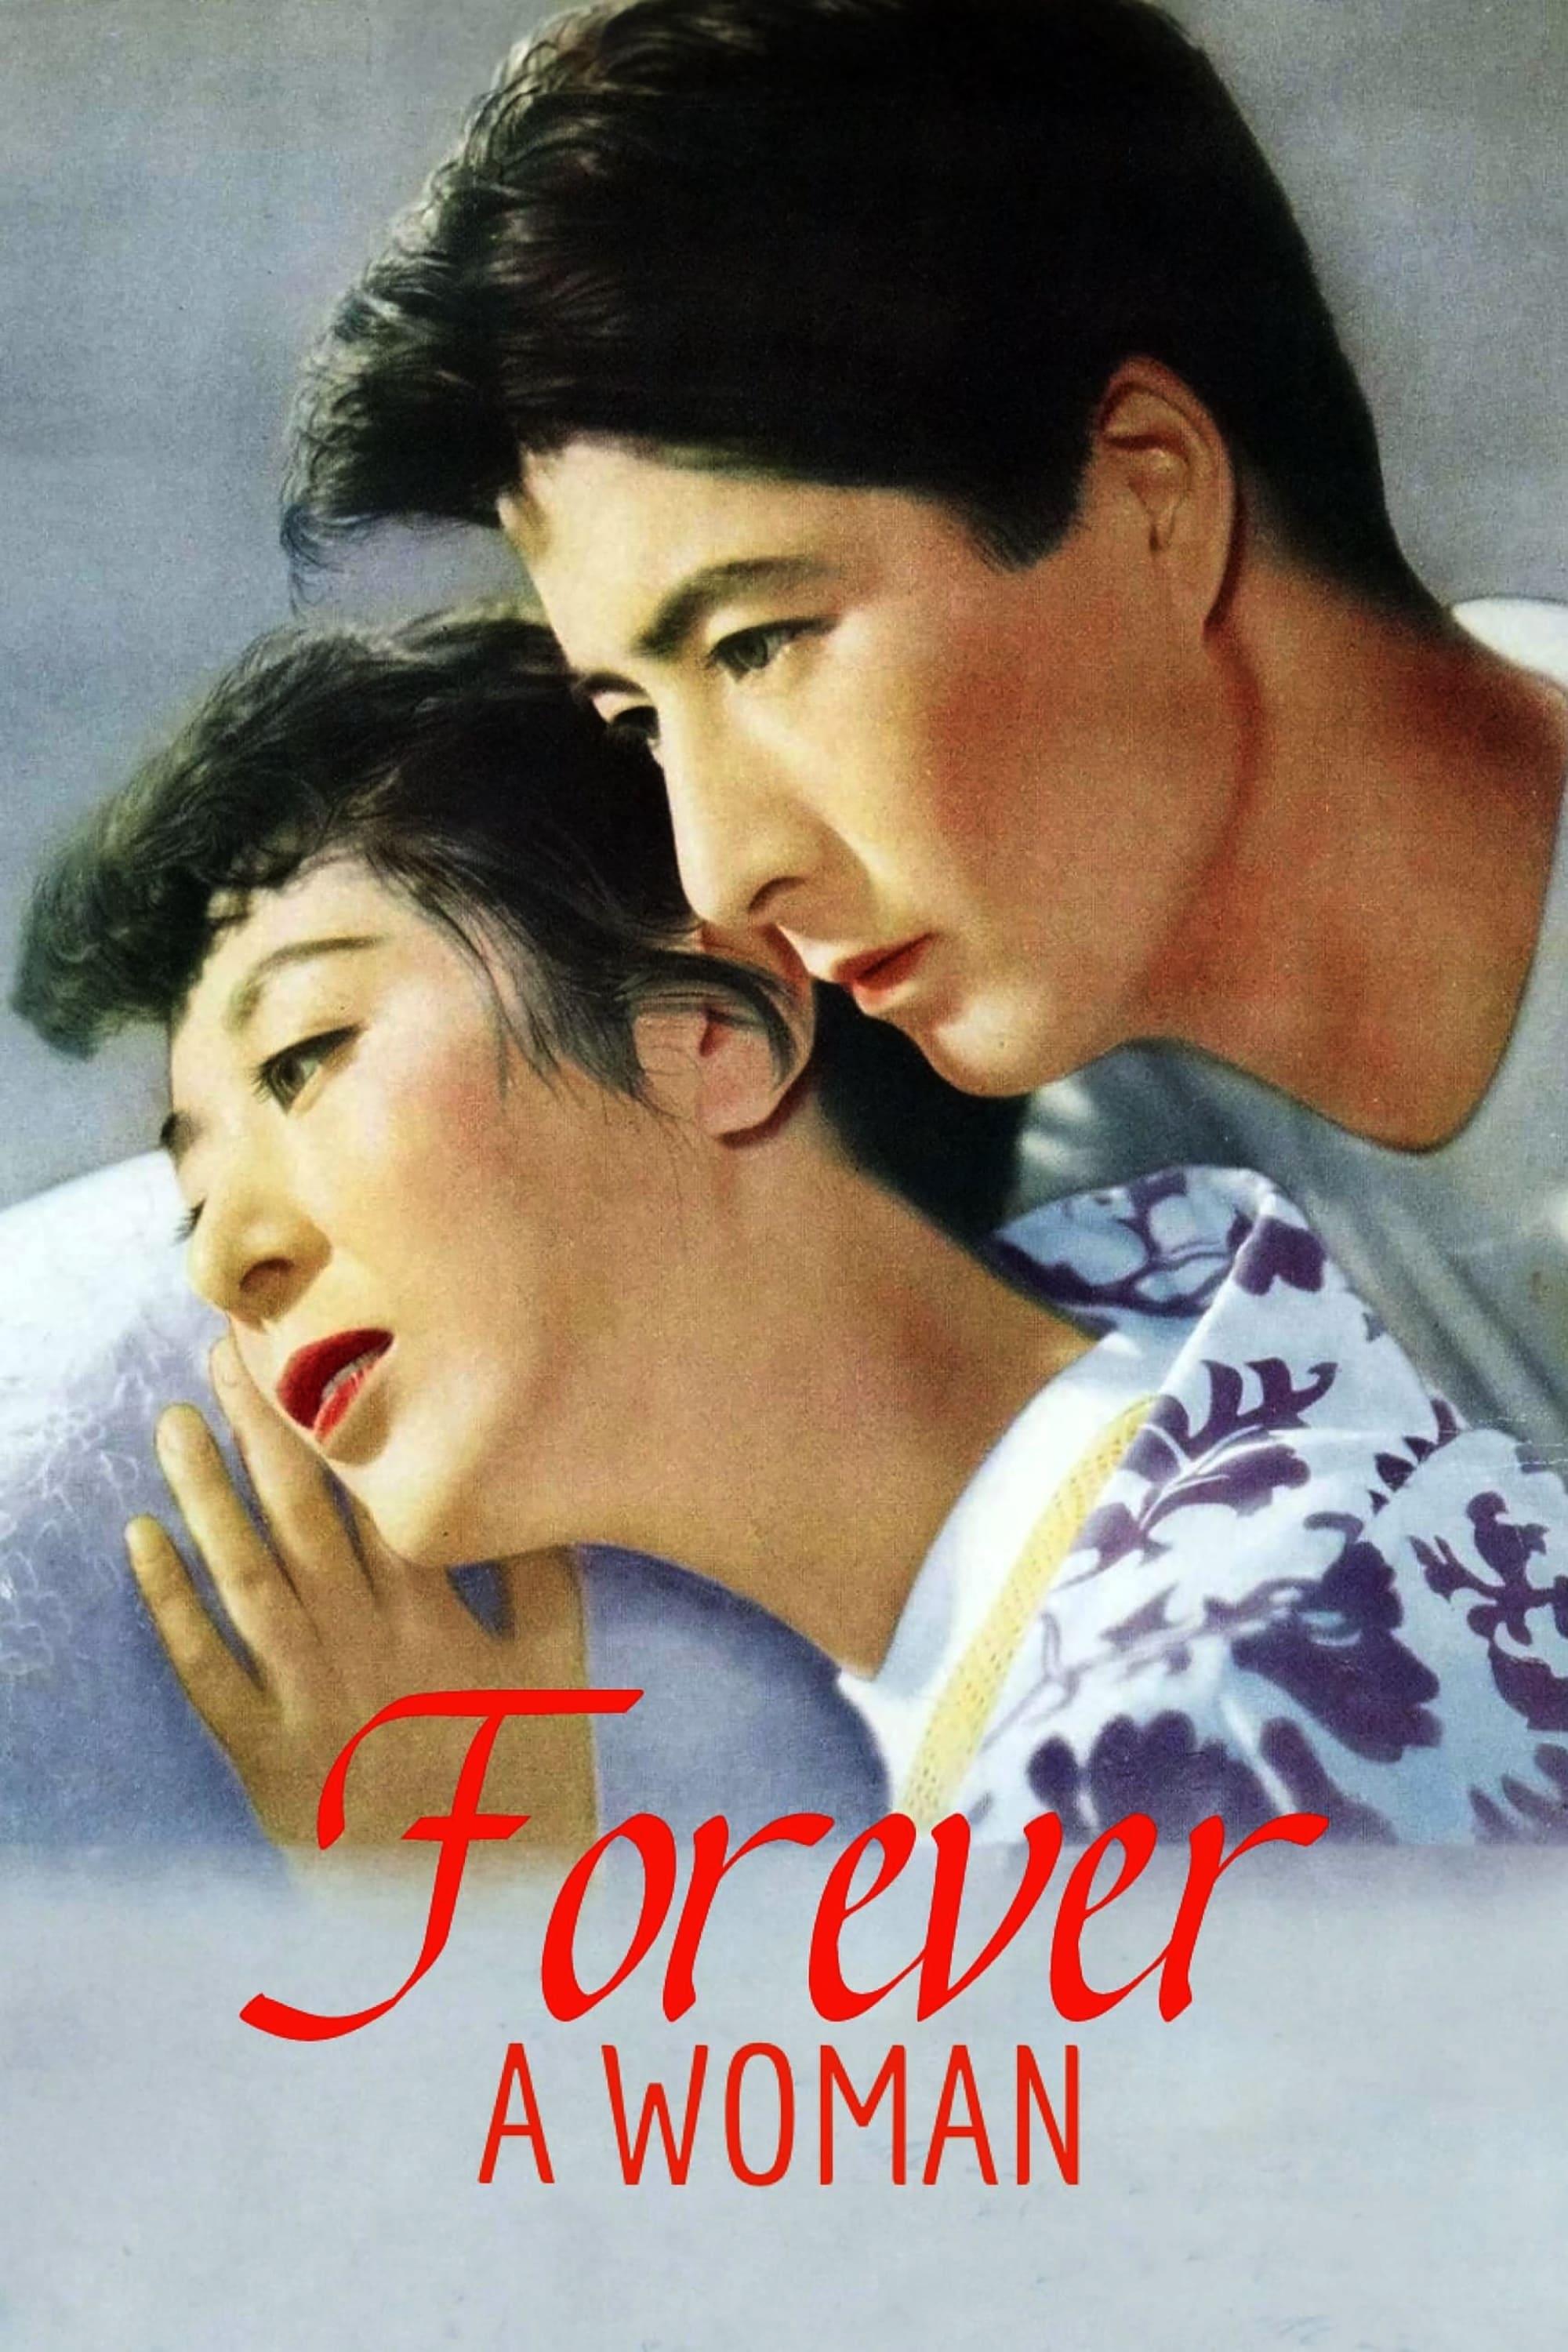 Forever a Woman poster